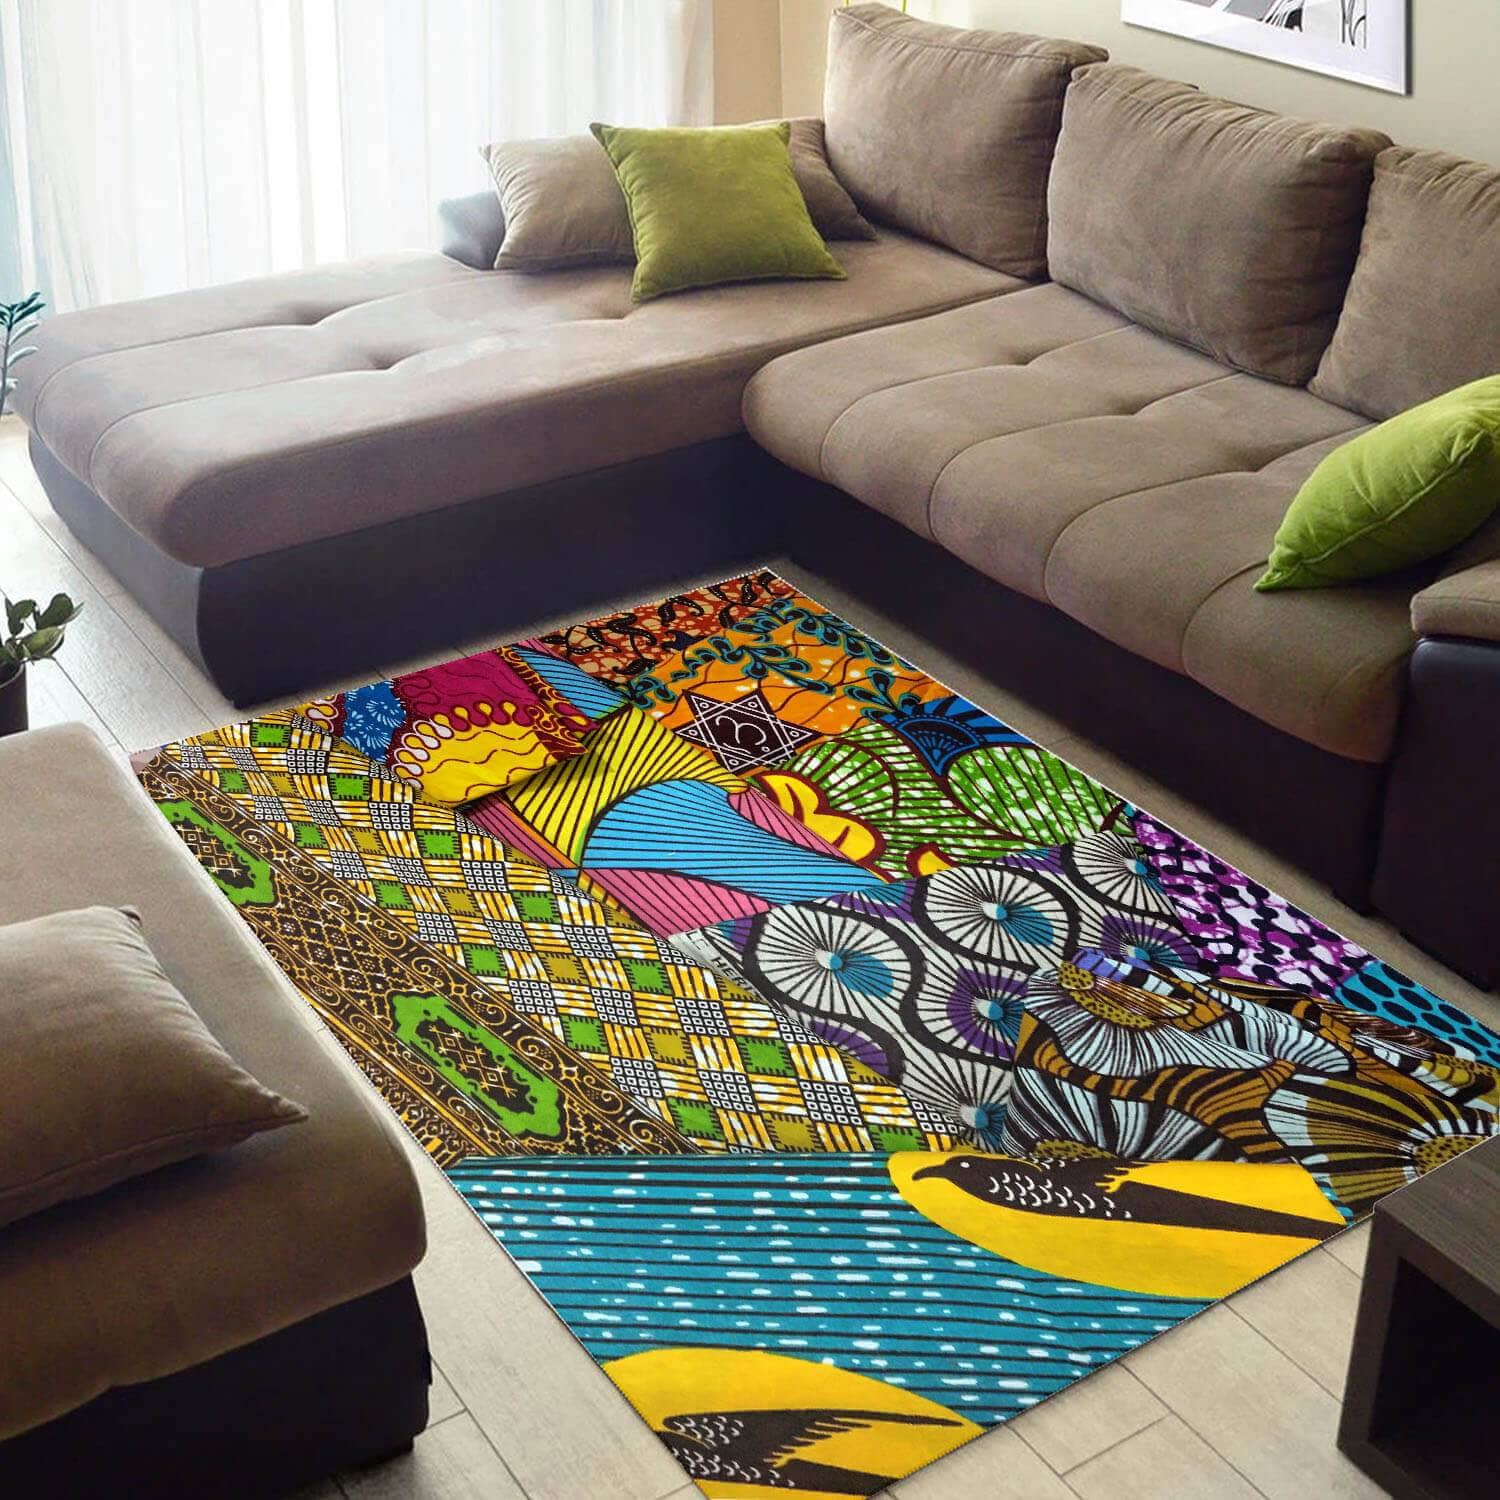 Cool African Abstract Afro American Ethnic Seamless Pattern Design Floor Carpet Room Rug